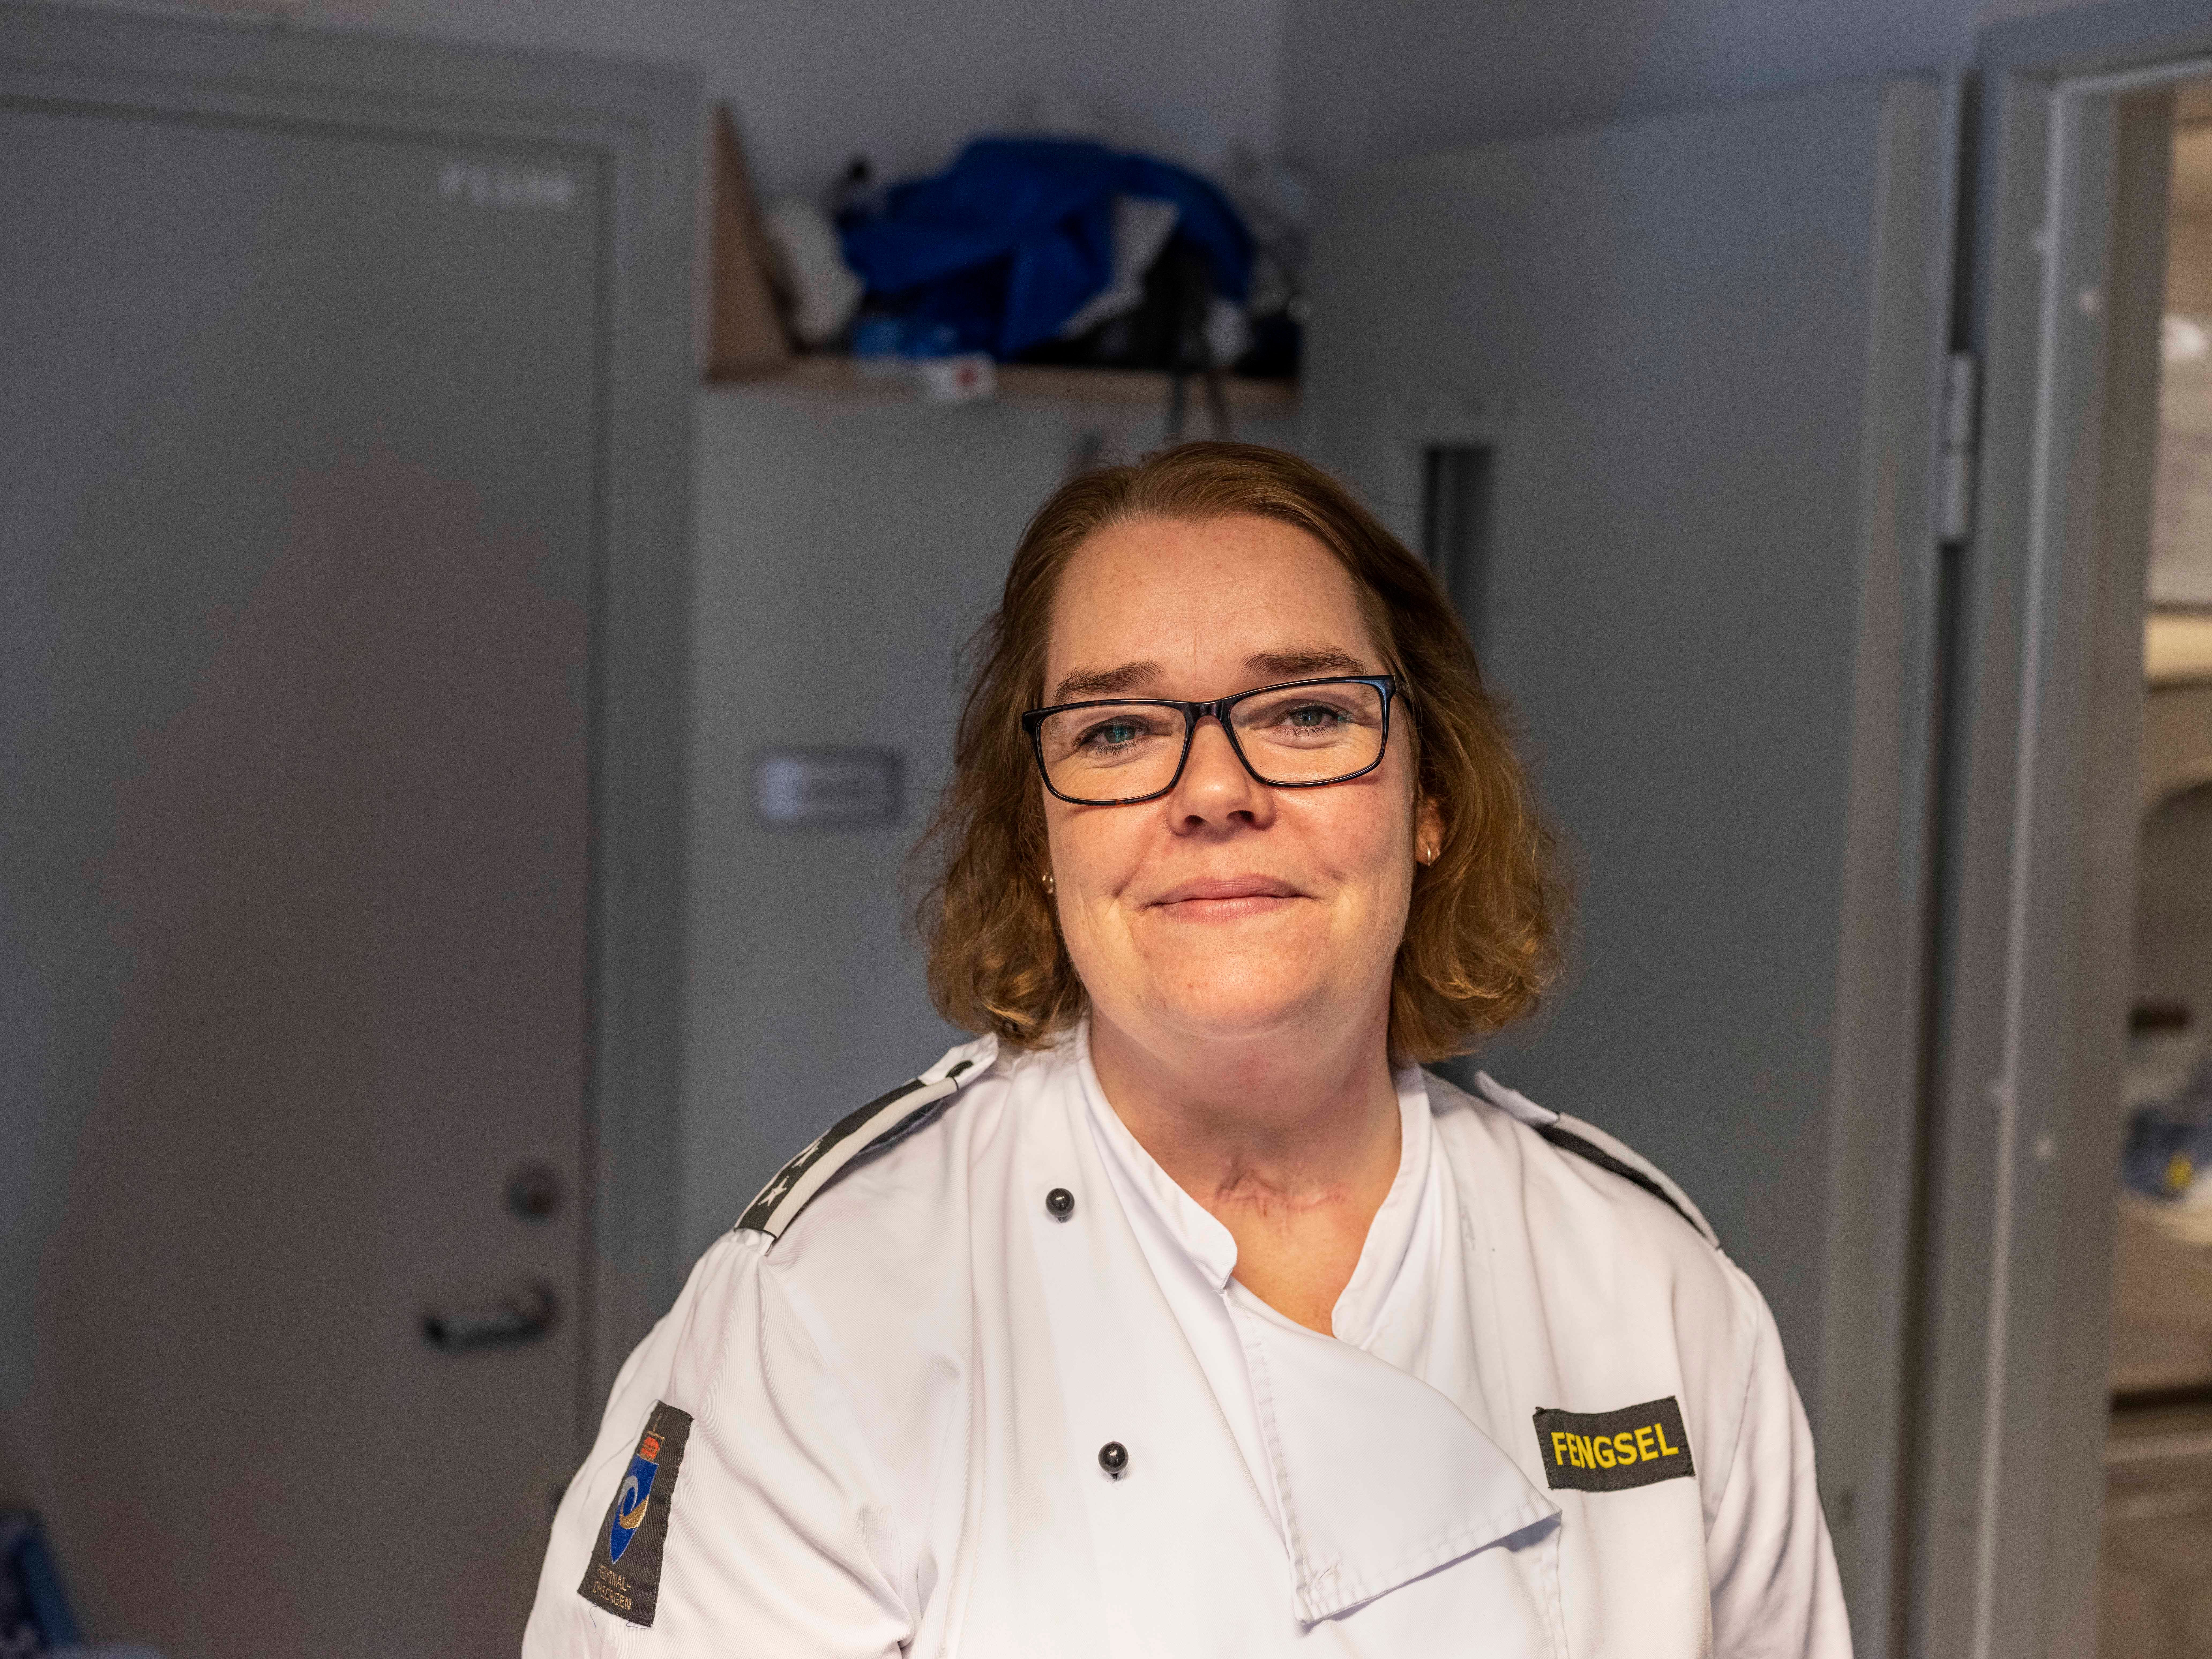 Chef Marie Maereid directs the kitchen at Halden Prison in Norway. Inmates are allowed to use knives and prepare gourmet meals for diners at the prison ' s restaurant.